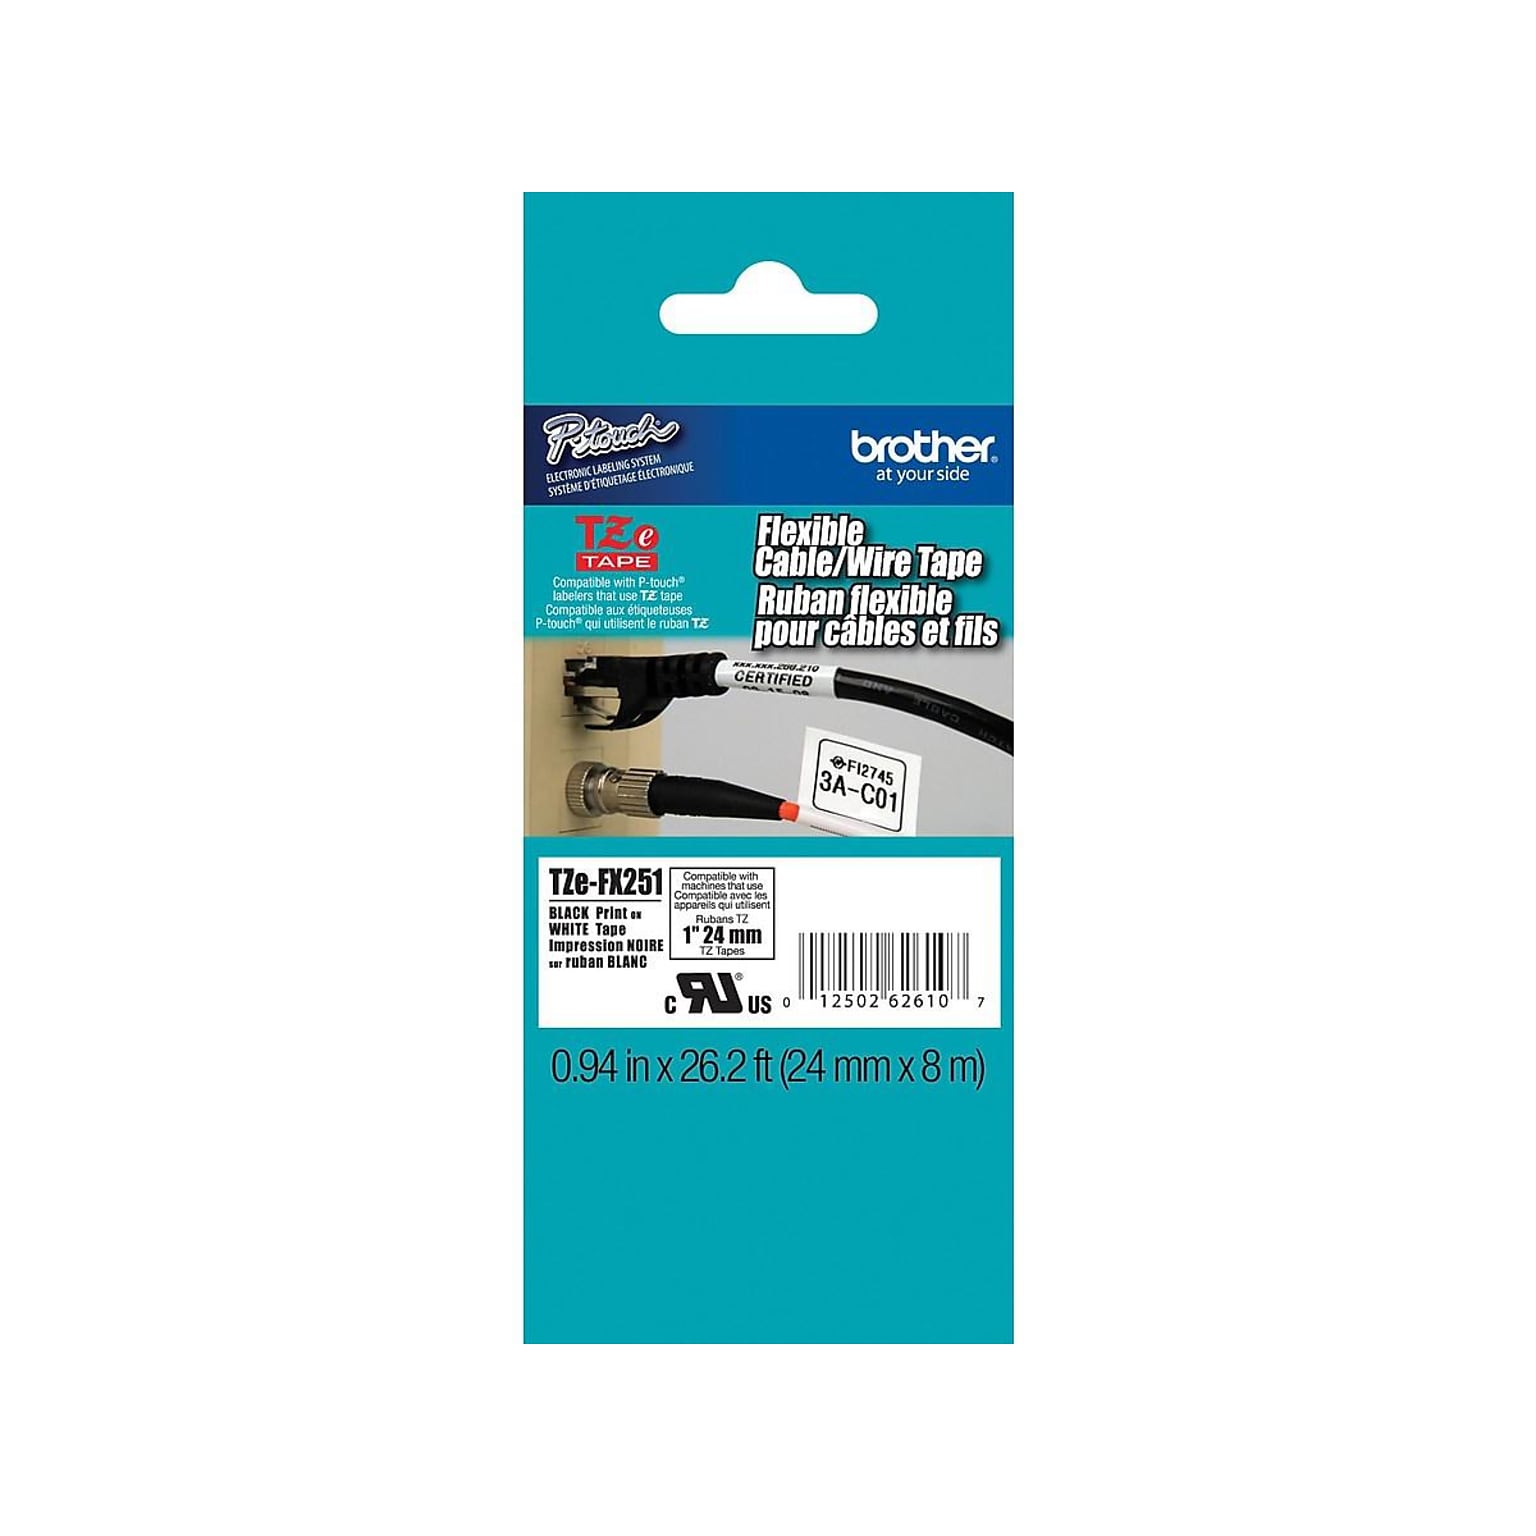 Brother P-touch TZe-FX251 Laminated Flexible ID Label Maker Tape, 1 x 26-2/10, Black on White (TZe-FX251)